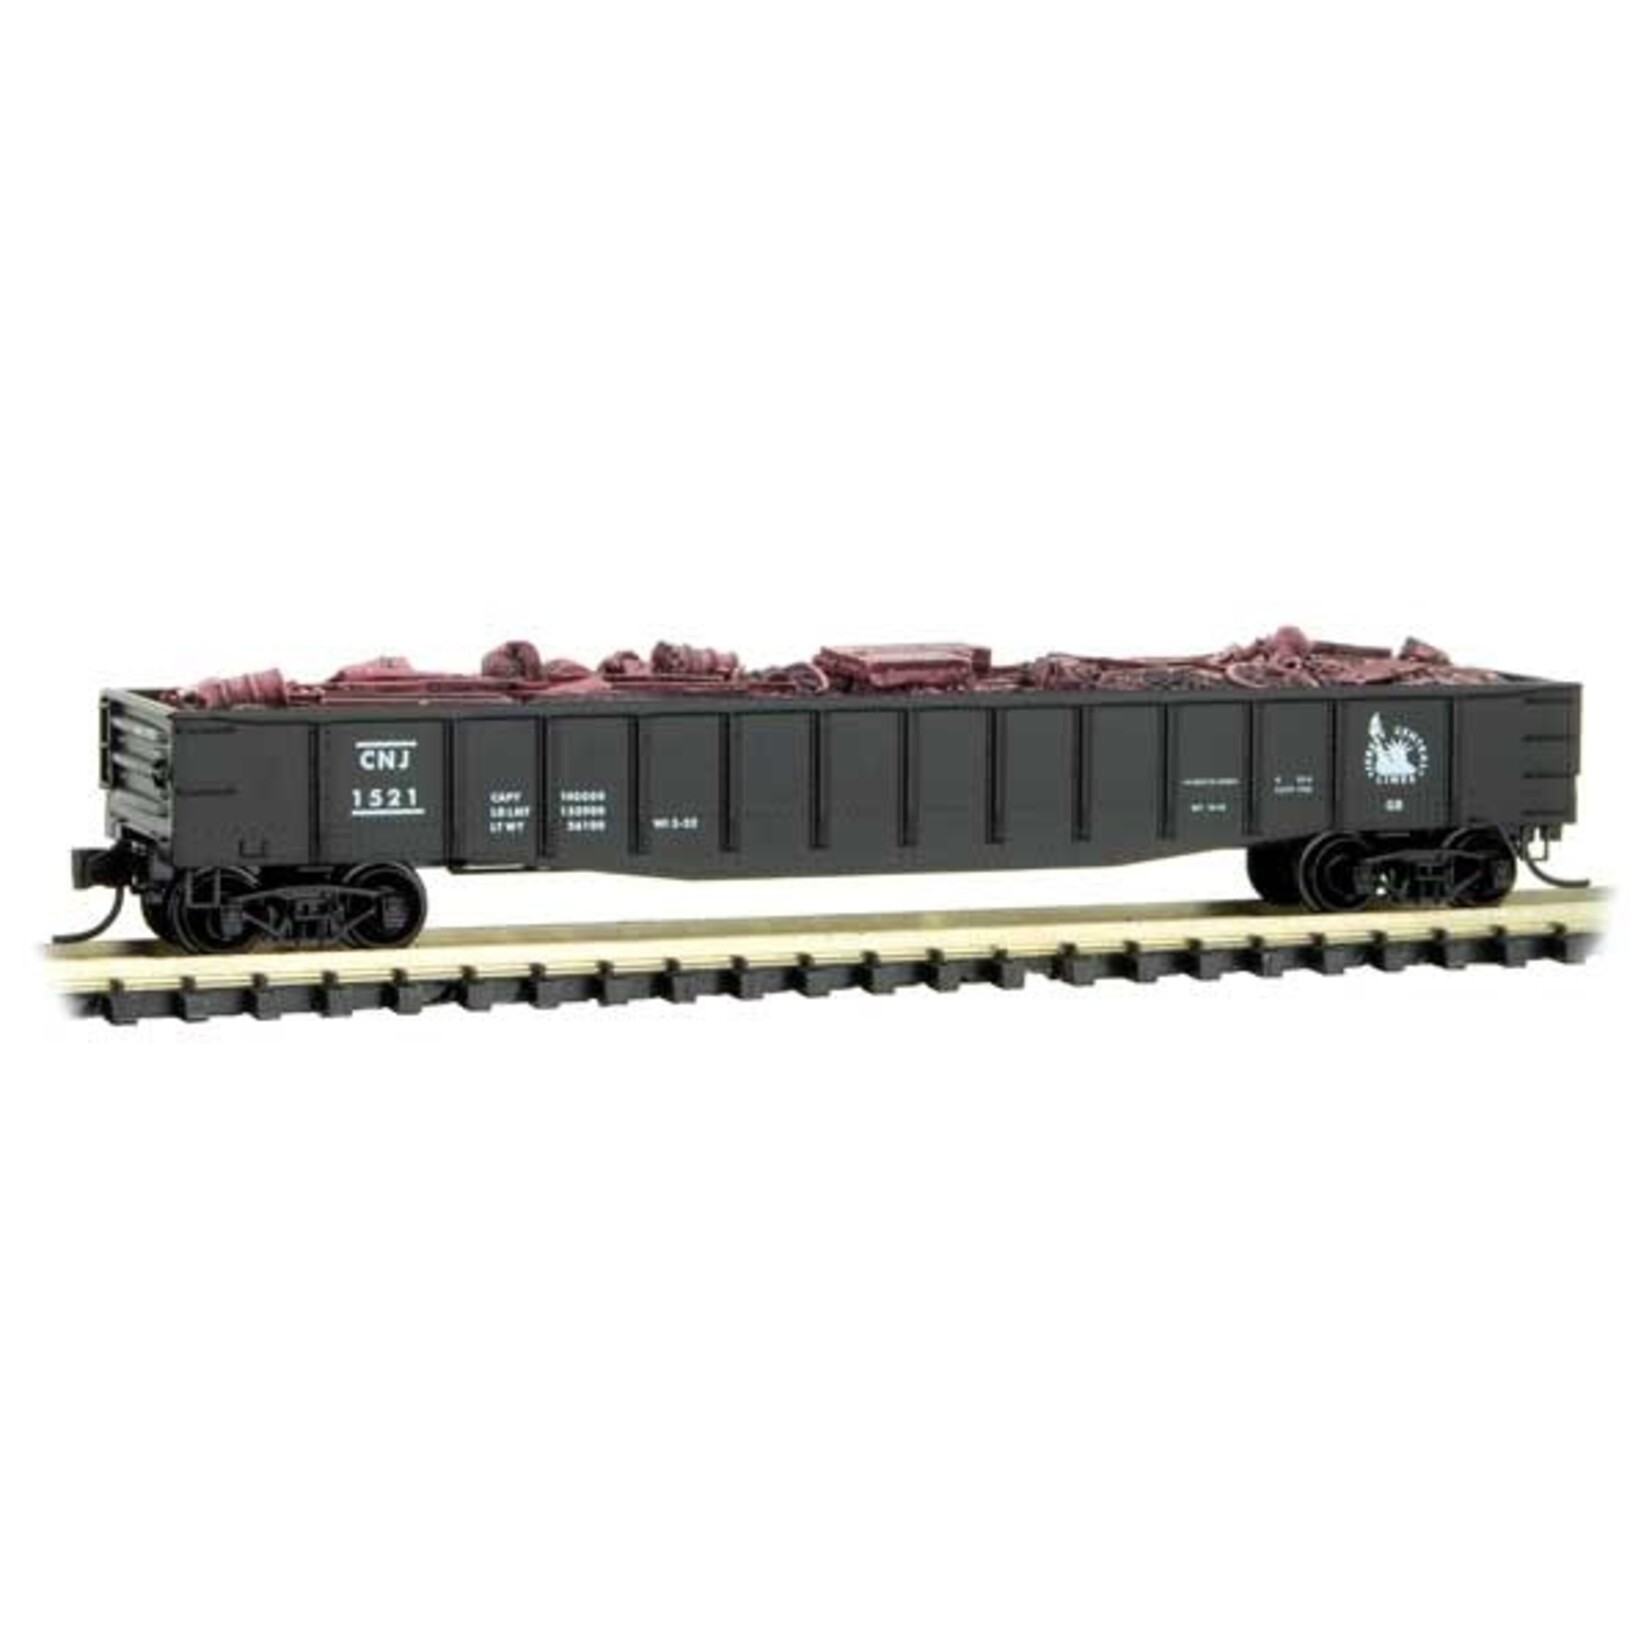 Micro Trains Line 10500301 N Central New Jersey Gondola